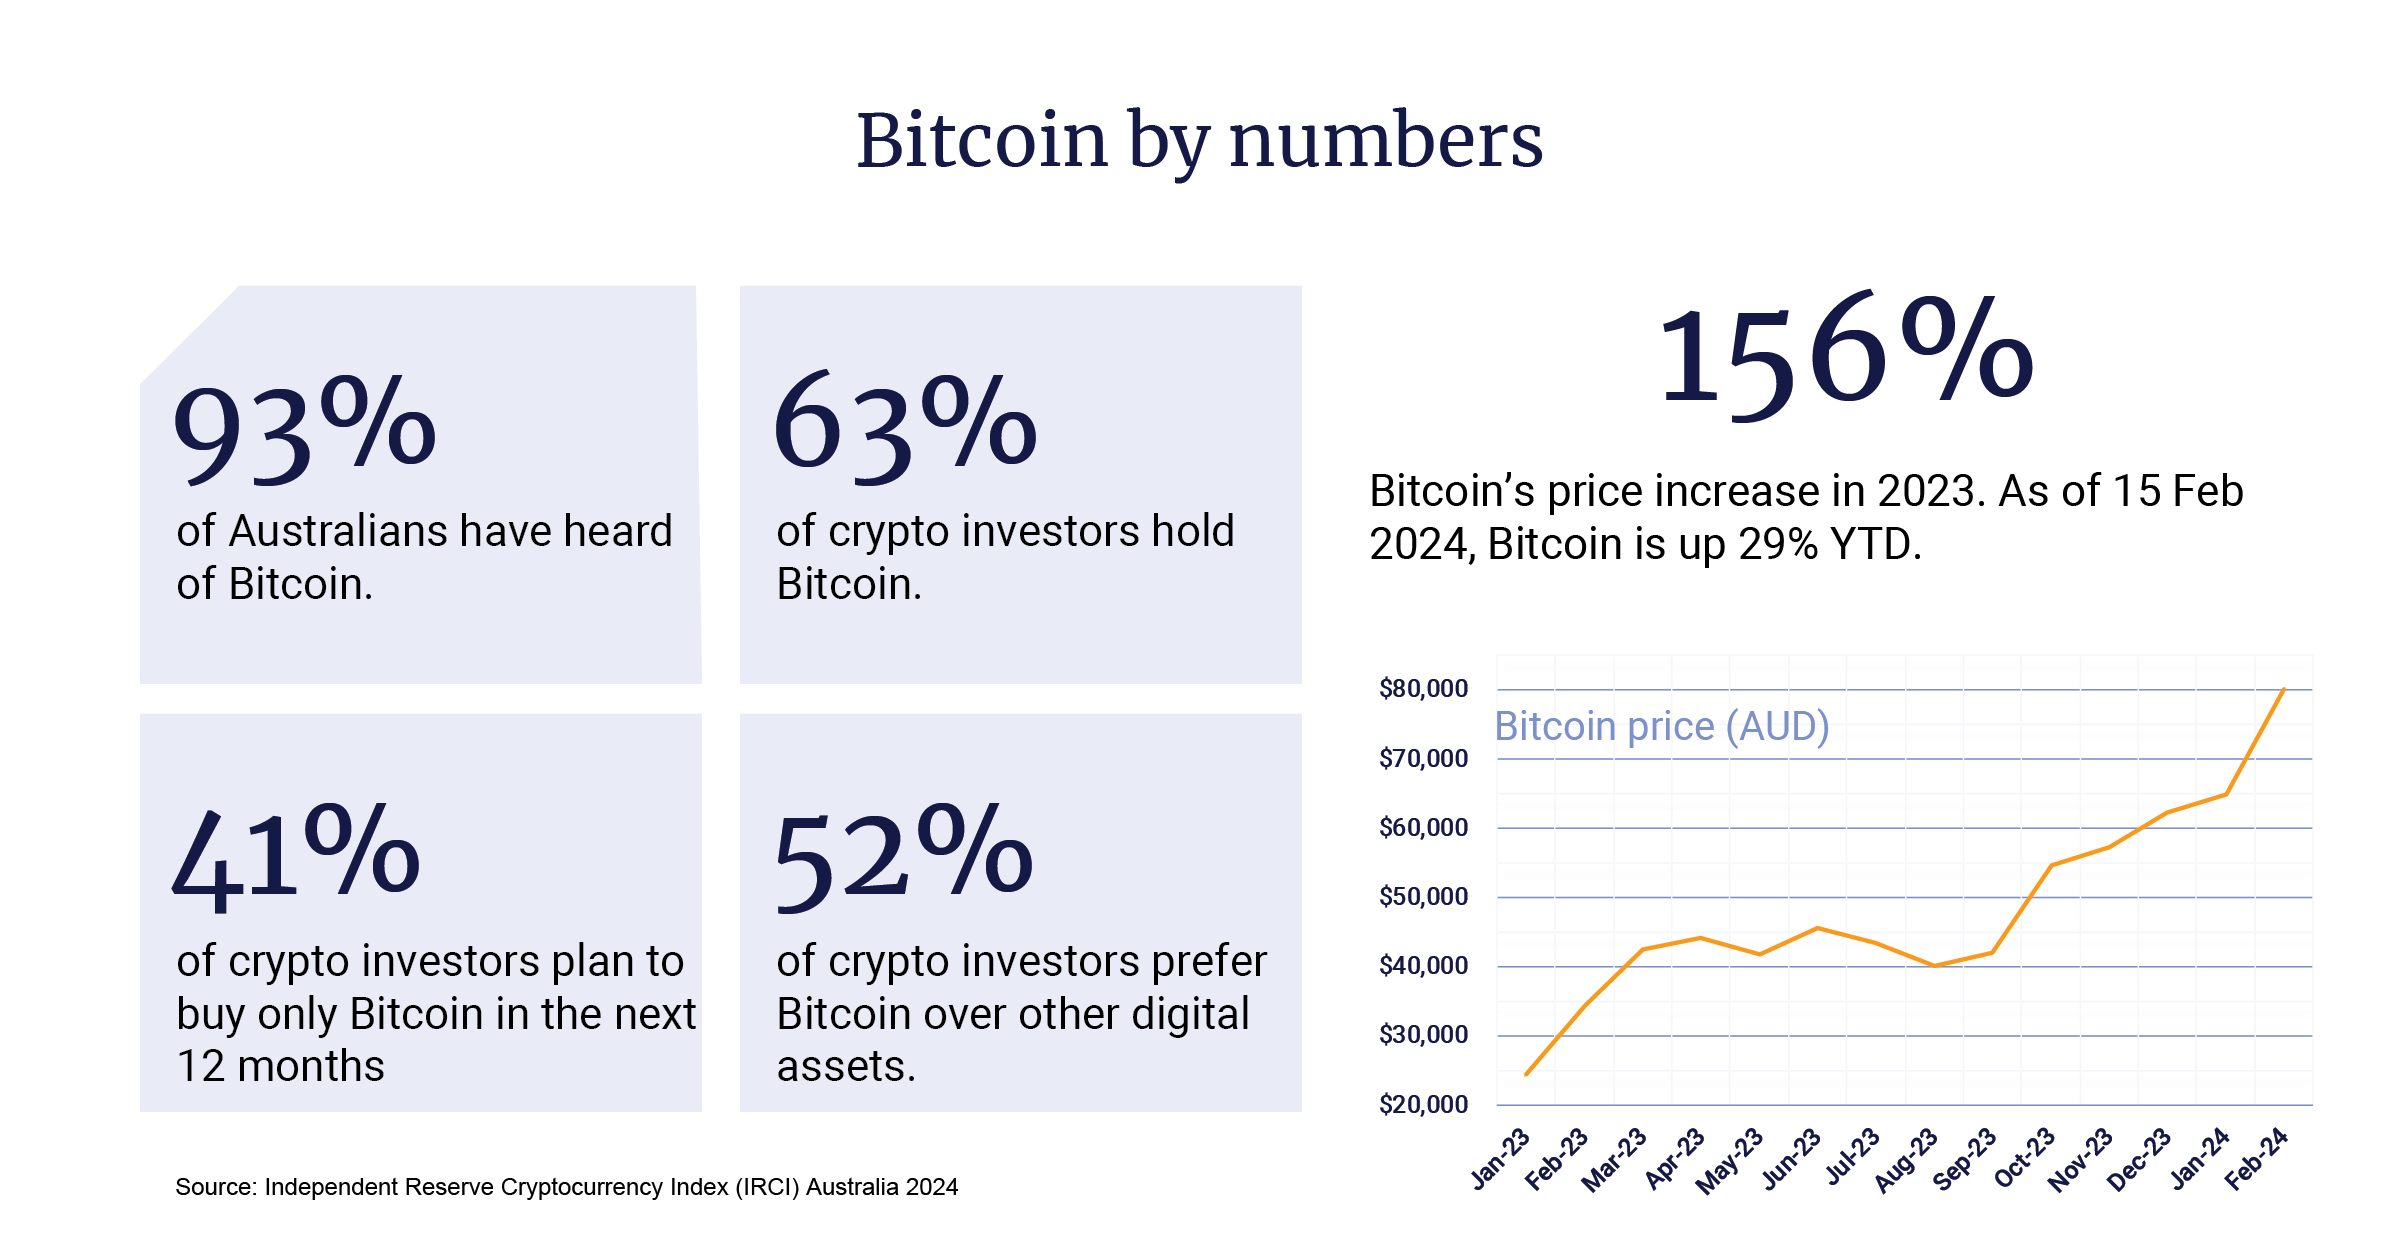 Bitcoin by numbers (IRCI 2024)